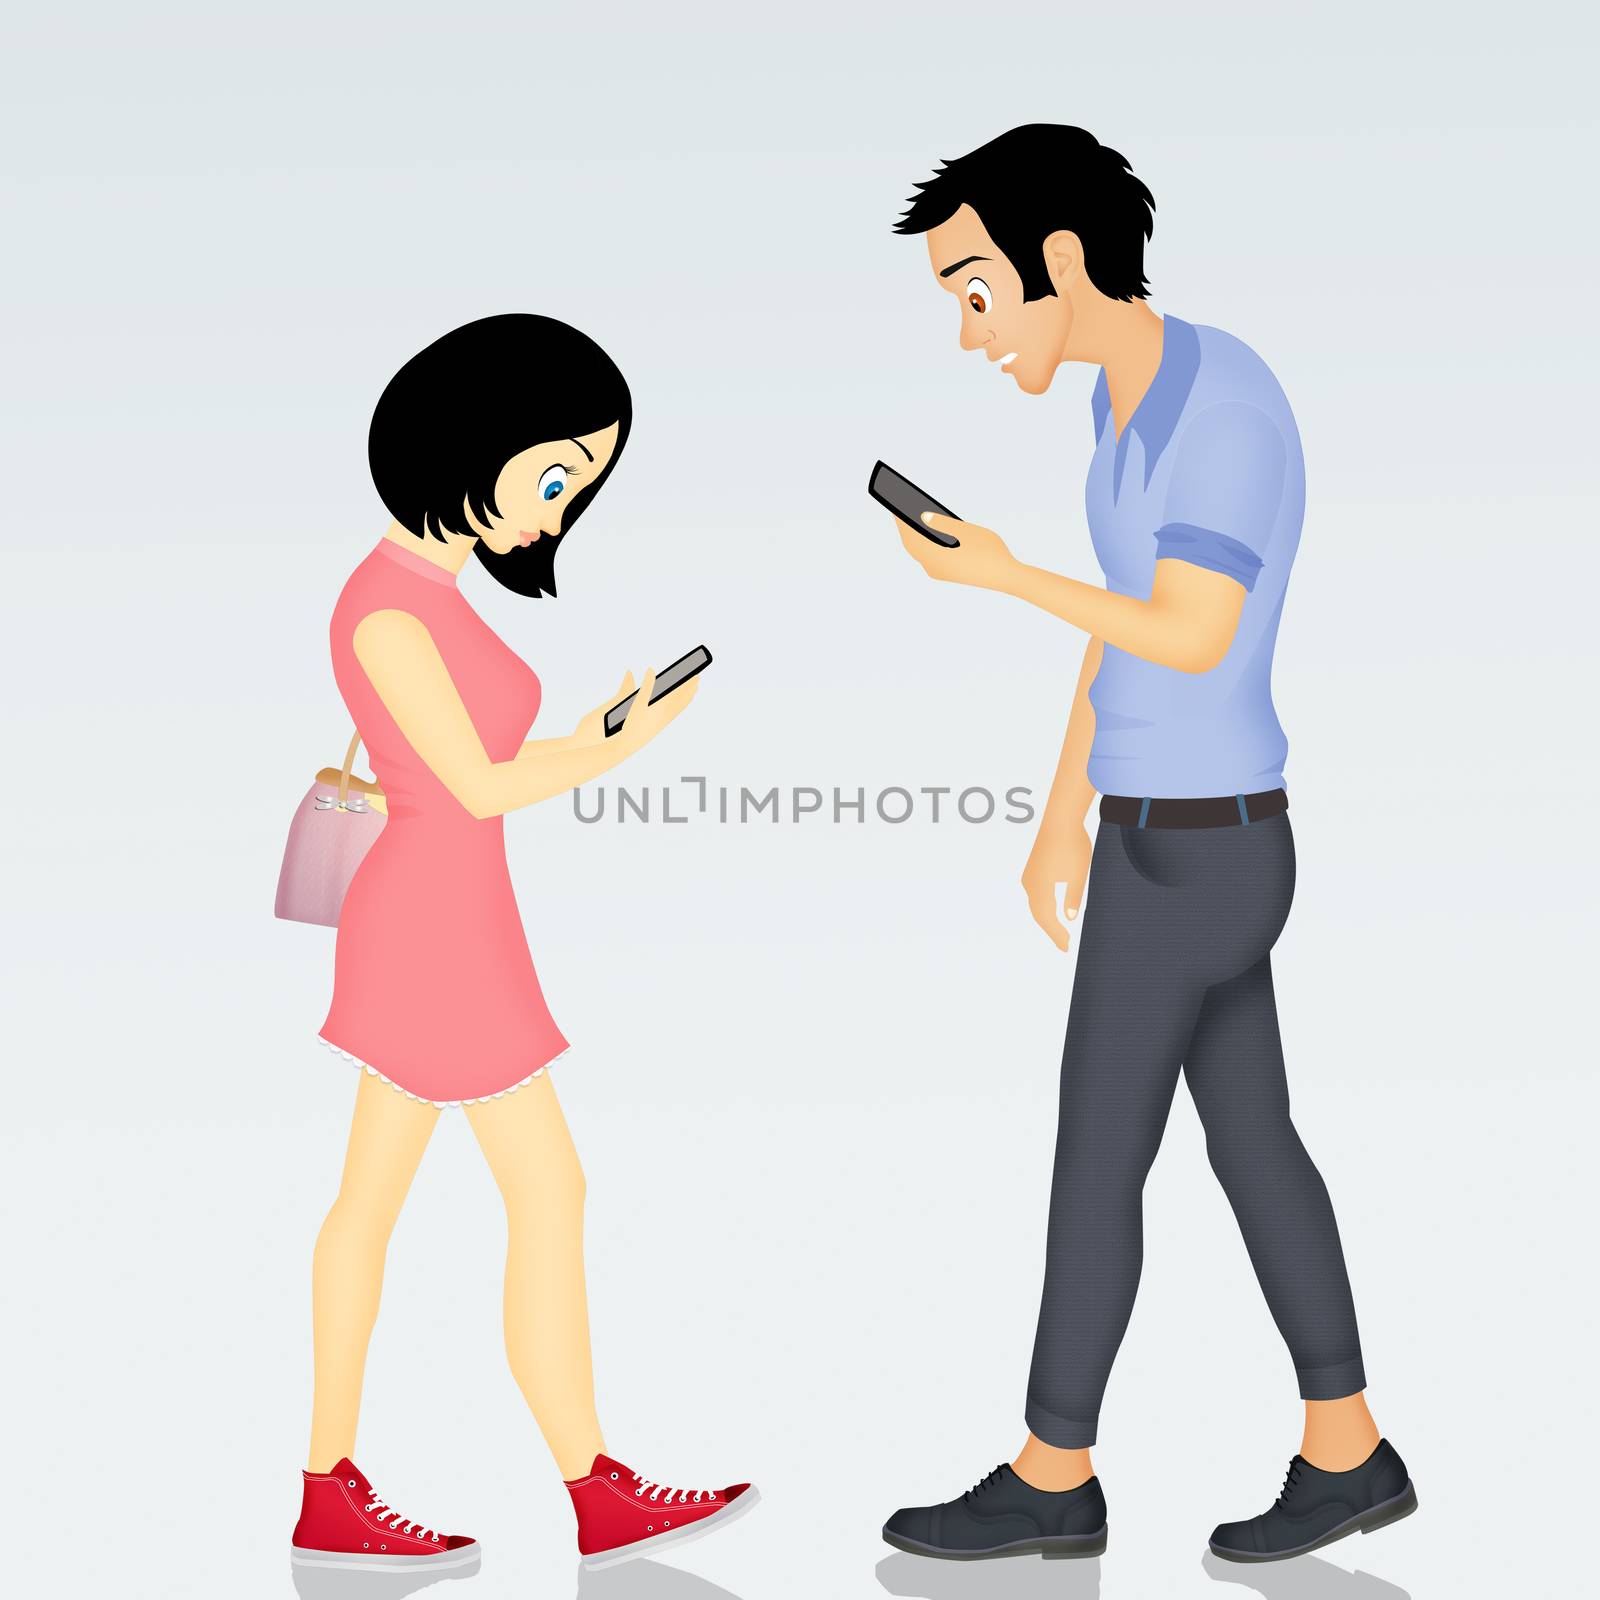 illustration of people walking with smartphones